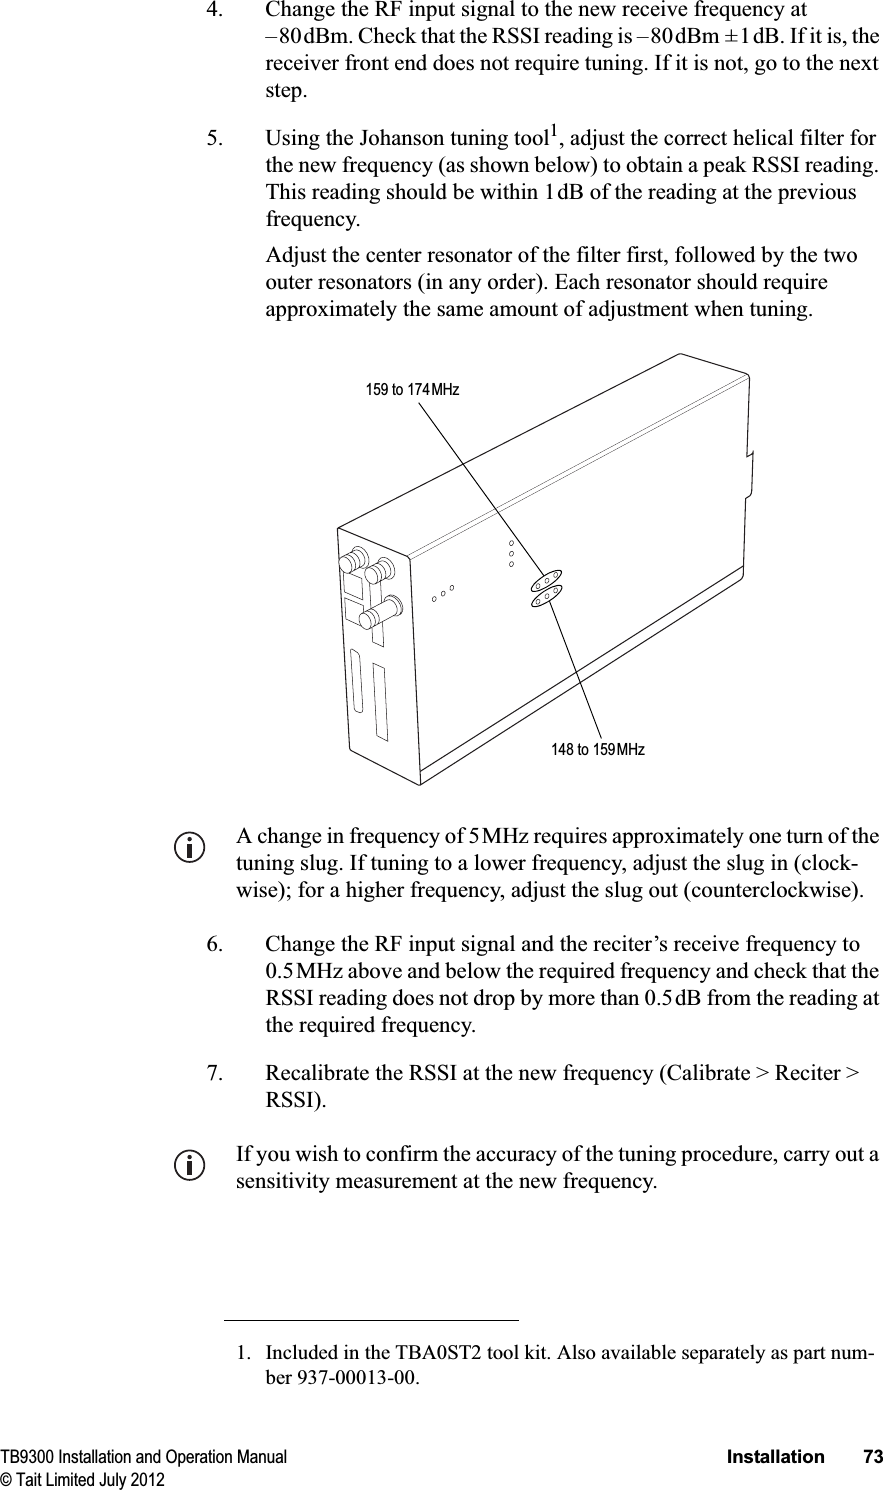 TB9300 Installation and Operation Manual Installation 73© Tait Limited July 20124. Change the RF input signal to the new receive frequency at –80dBm. Check that the RSSI reading is –80dBm ±1dB. If it is, the receiver front end does not require tuning. If it is not, go to the next step.5. Using the Johanson tuning tool1, adjust the correct helical filter for the new frequency (as shown below) to obtain a peak RSSI reading. This reading should be within 1dB of the reading at the previous frequency. Adjust the center resonator of the filter first, followed by the two outer resonators (in any order). Each resonator should require approximately the same amount of adjustment when tuning.A change in frequency of 5MHz requires approximately one turn of the tuning slug. If tuning to a lower frequency, adjust the slug in (clock-wise); for a higher frequency, adjust the slug out (counterclockwise). 6. Change the RF input signal and the reciter’s receive frequency to 0.5MHz above and below the required frequency and check that the RSSI reading does not drop by more than 0.5dB from the reading at the required frequency.7. Recalibrate the RSSI at the new frequency (Calibrate &gt; Reciter &gt; RSSI).If you wish to confirm the accuracy of the tuning procedure, carry out a sensitivity measurement at the new frequency.1. Included in the TBA0ST2 tool kit. Also available separately as part num-ber 937-00013-00.148 to 159MHz159 to 174MHz